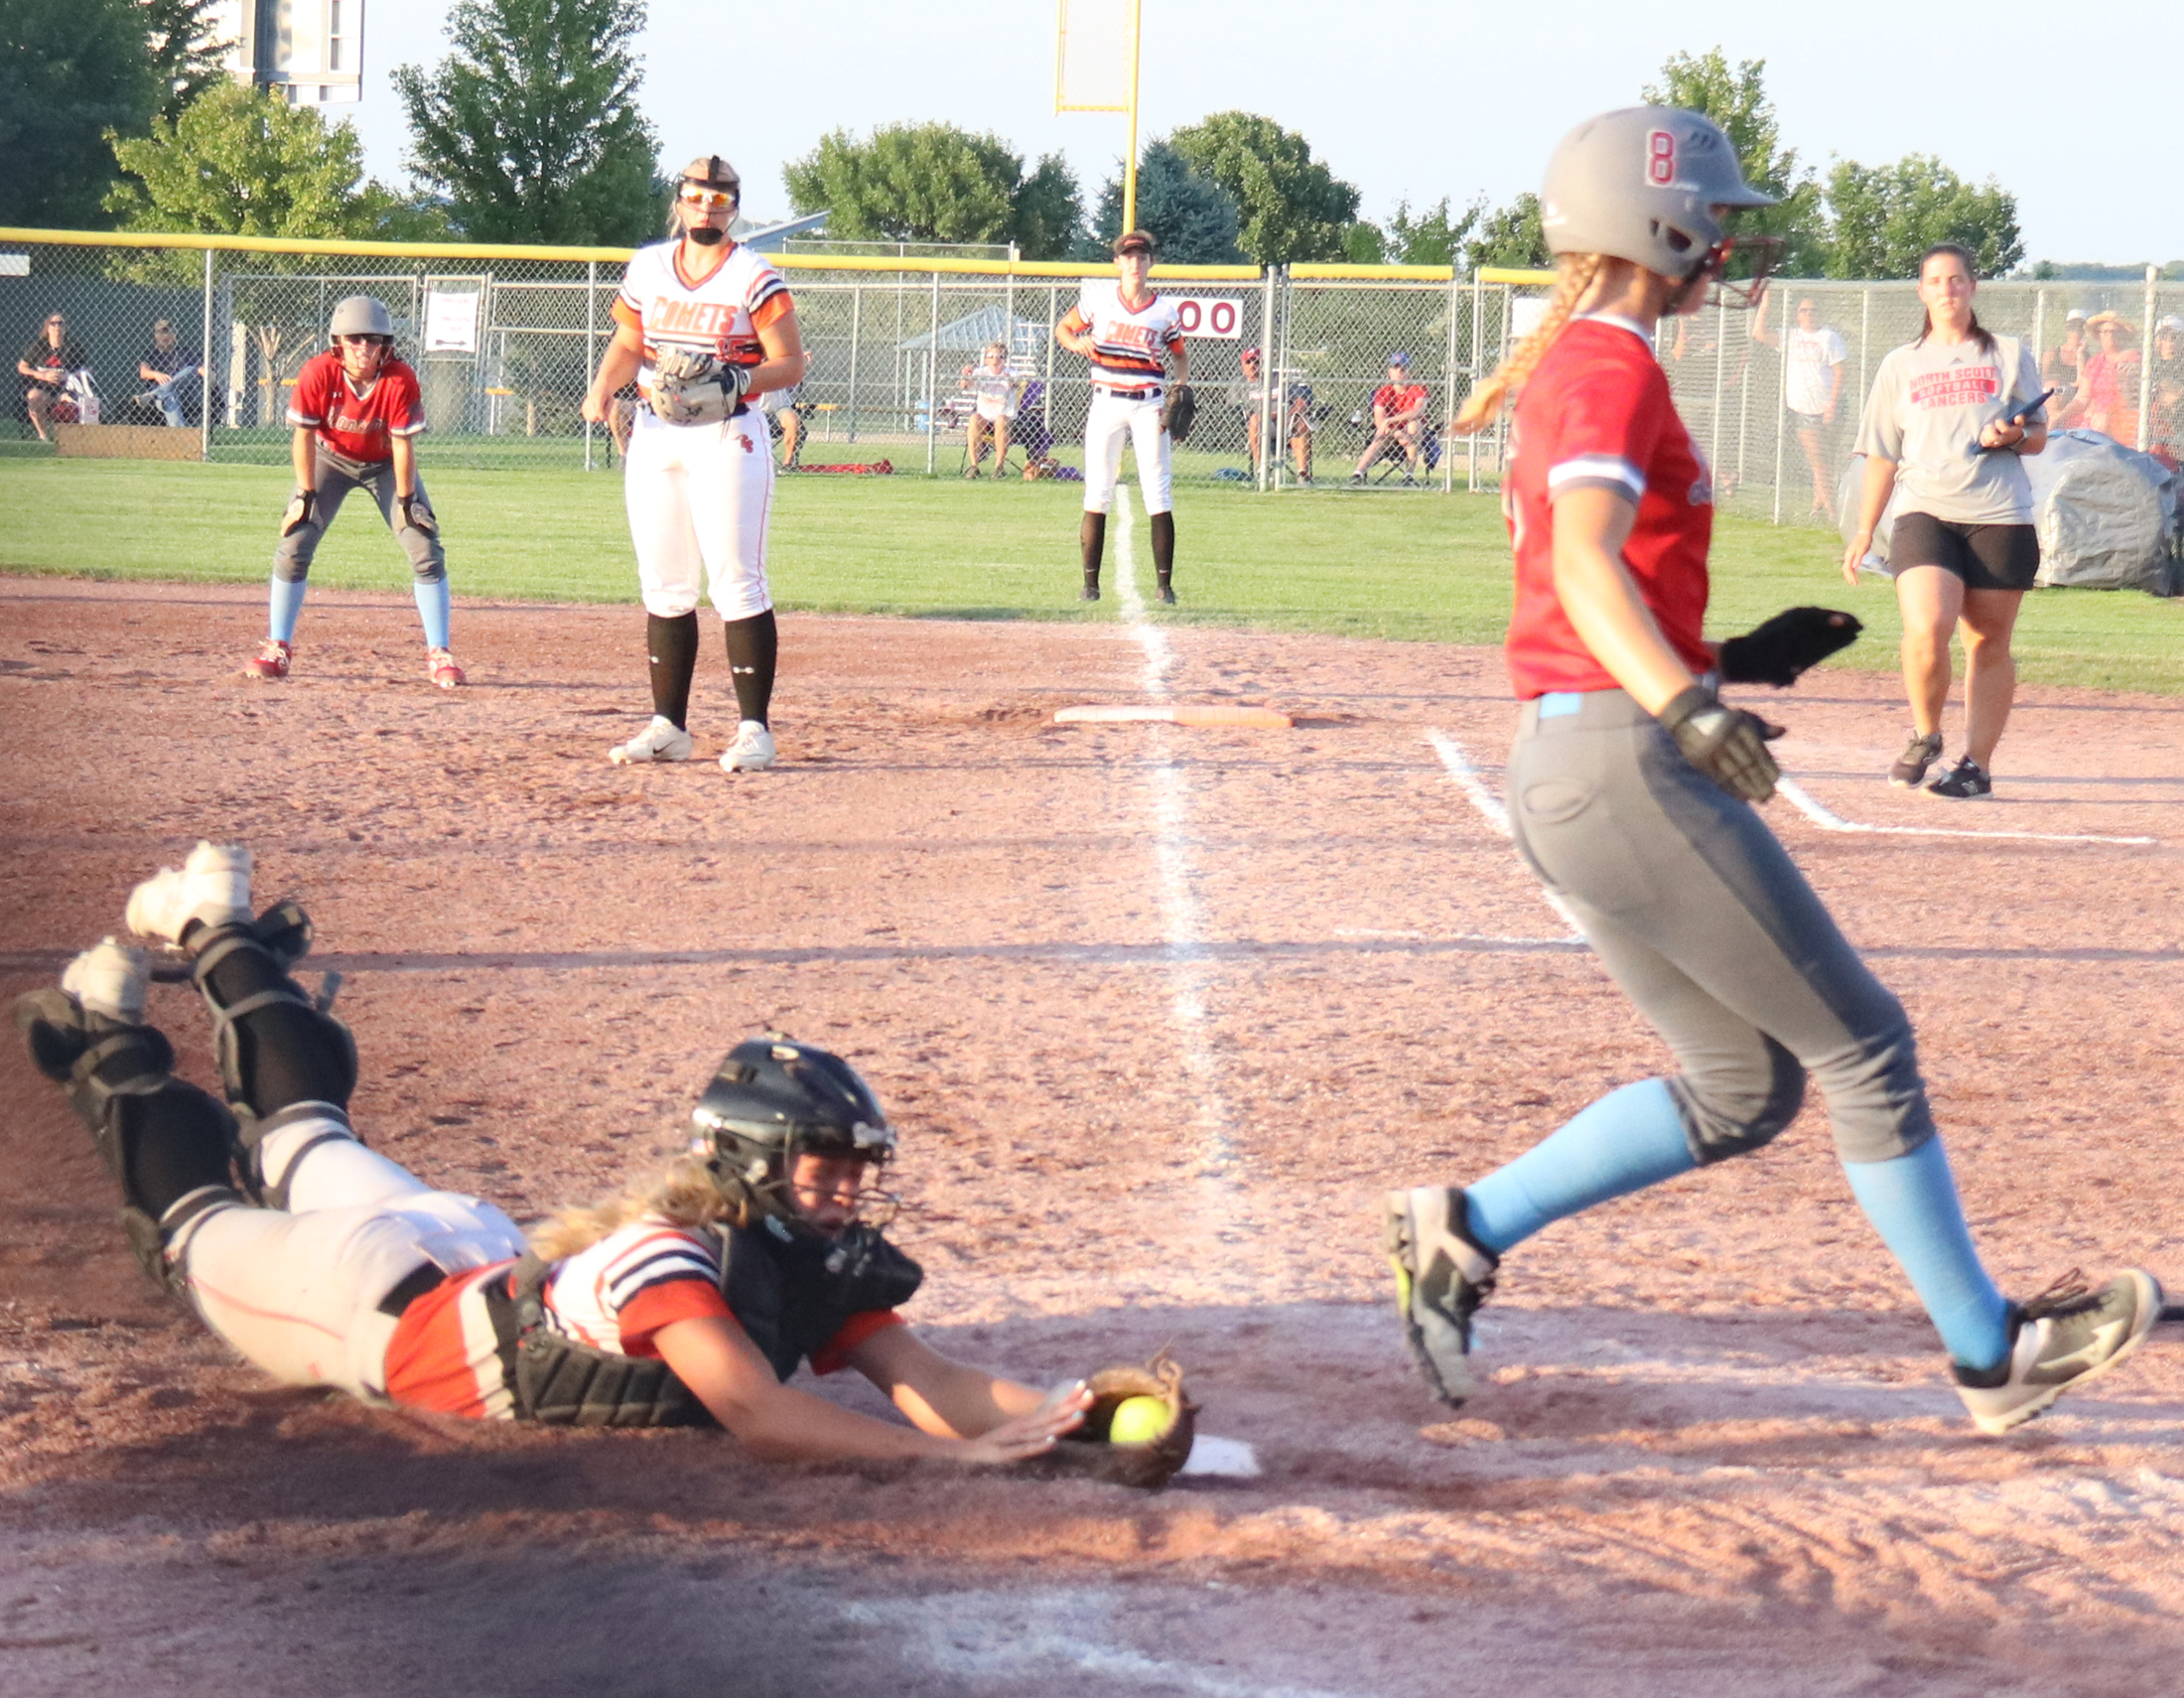 One out shy of reaching championship game, Comets fall to Lancers in extra innings